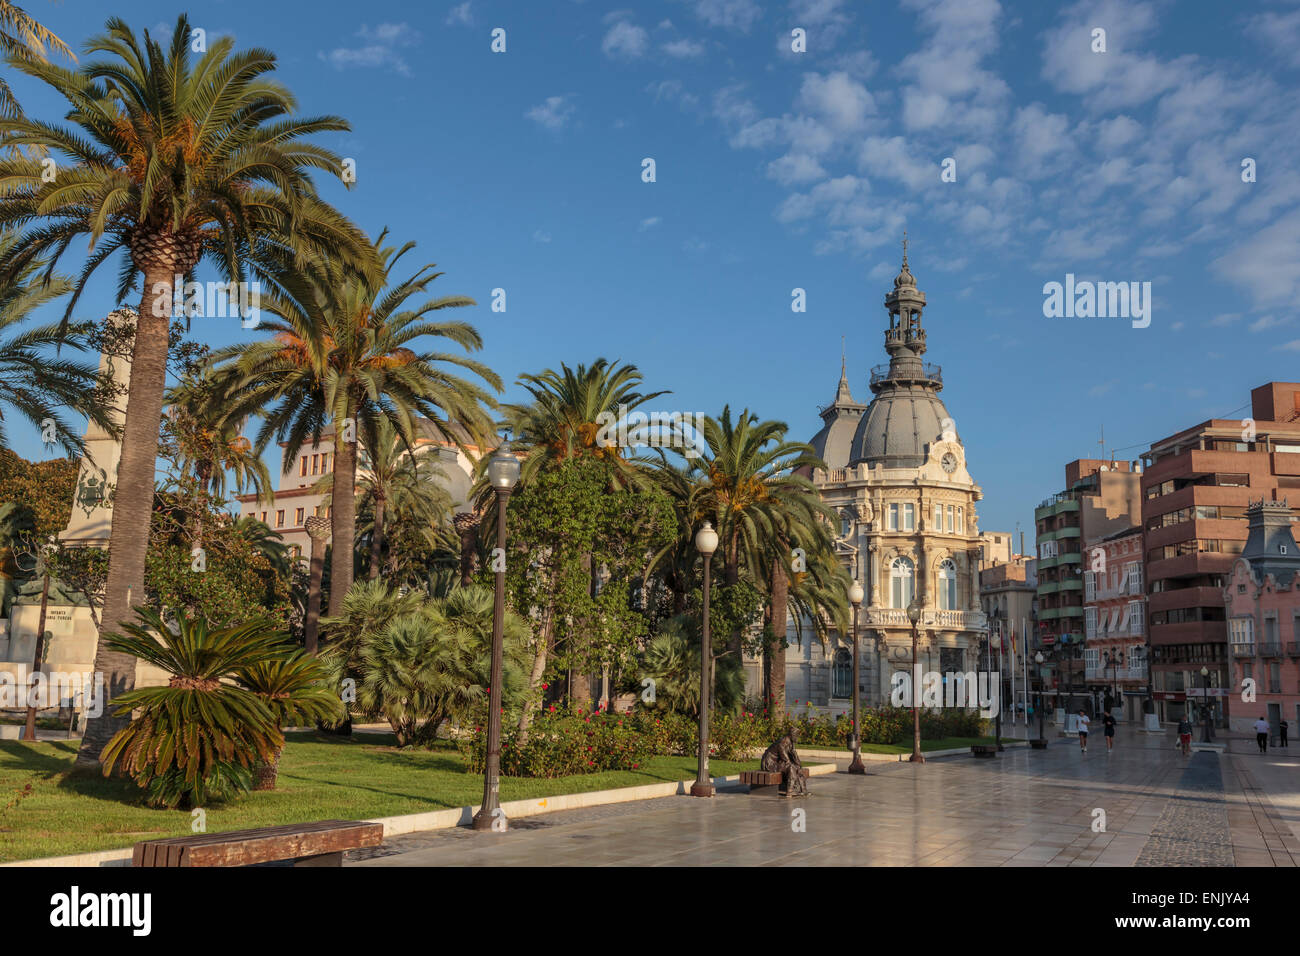 Town Hall under a cloud dappled blue sky with palm trees and roses, Cartagena, Murcia Region, Spain, Europe Stock Photo